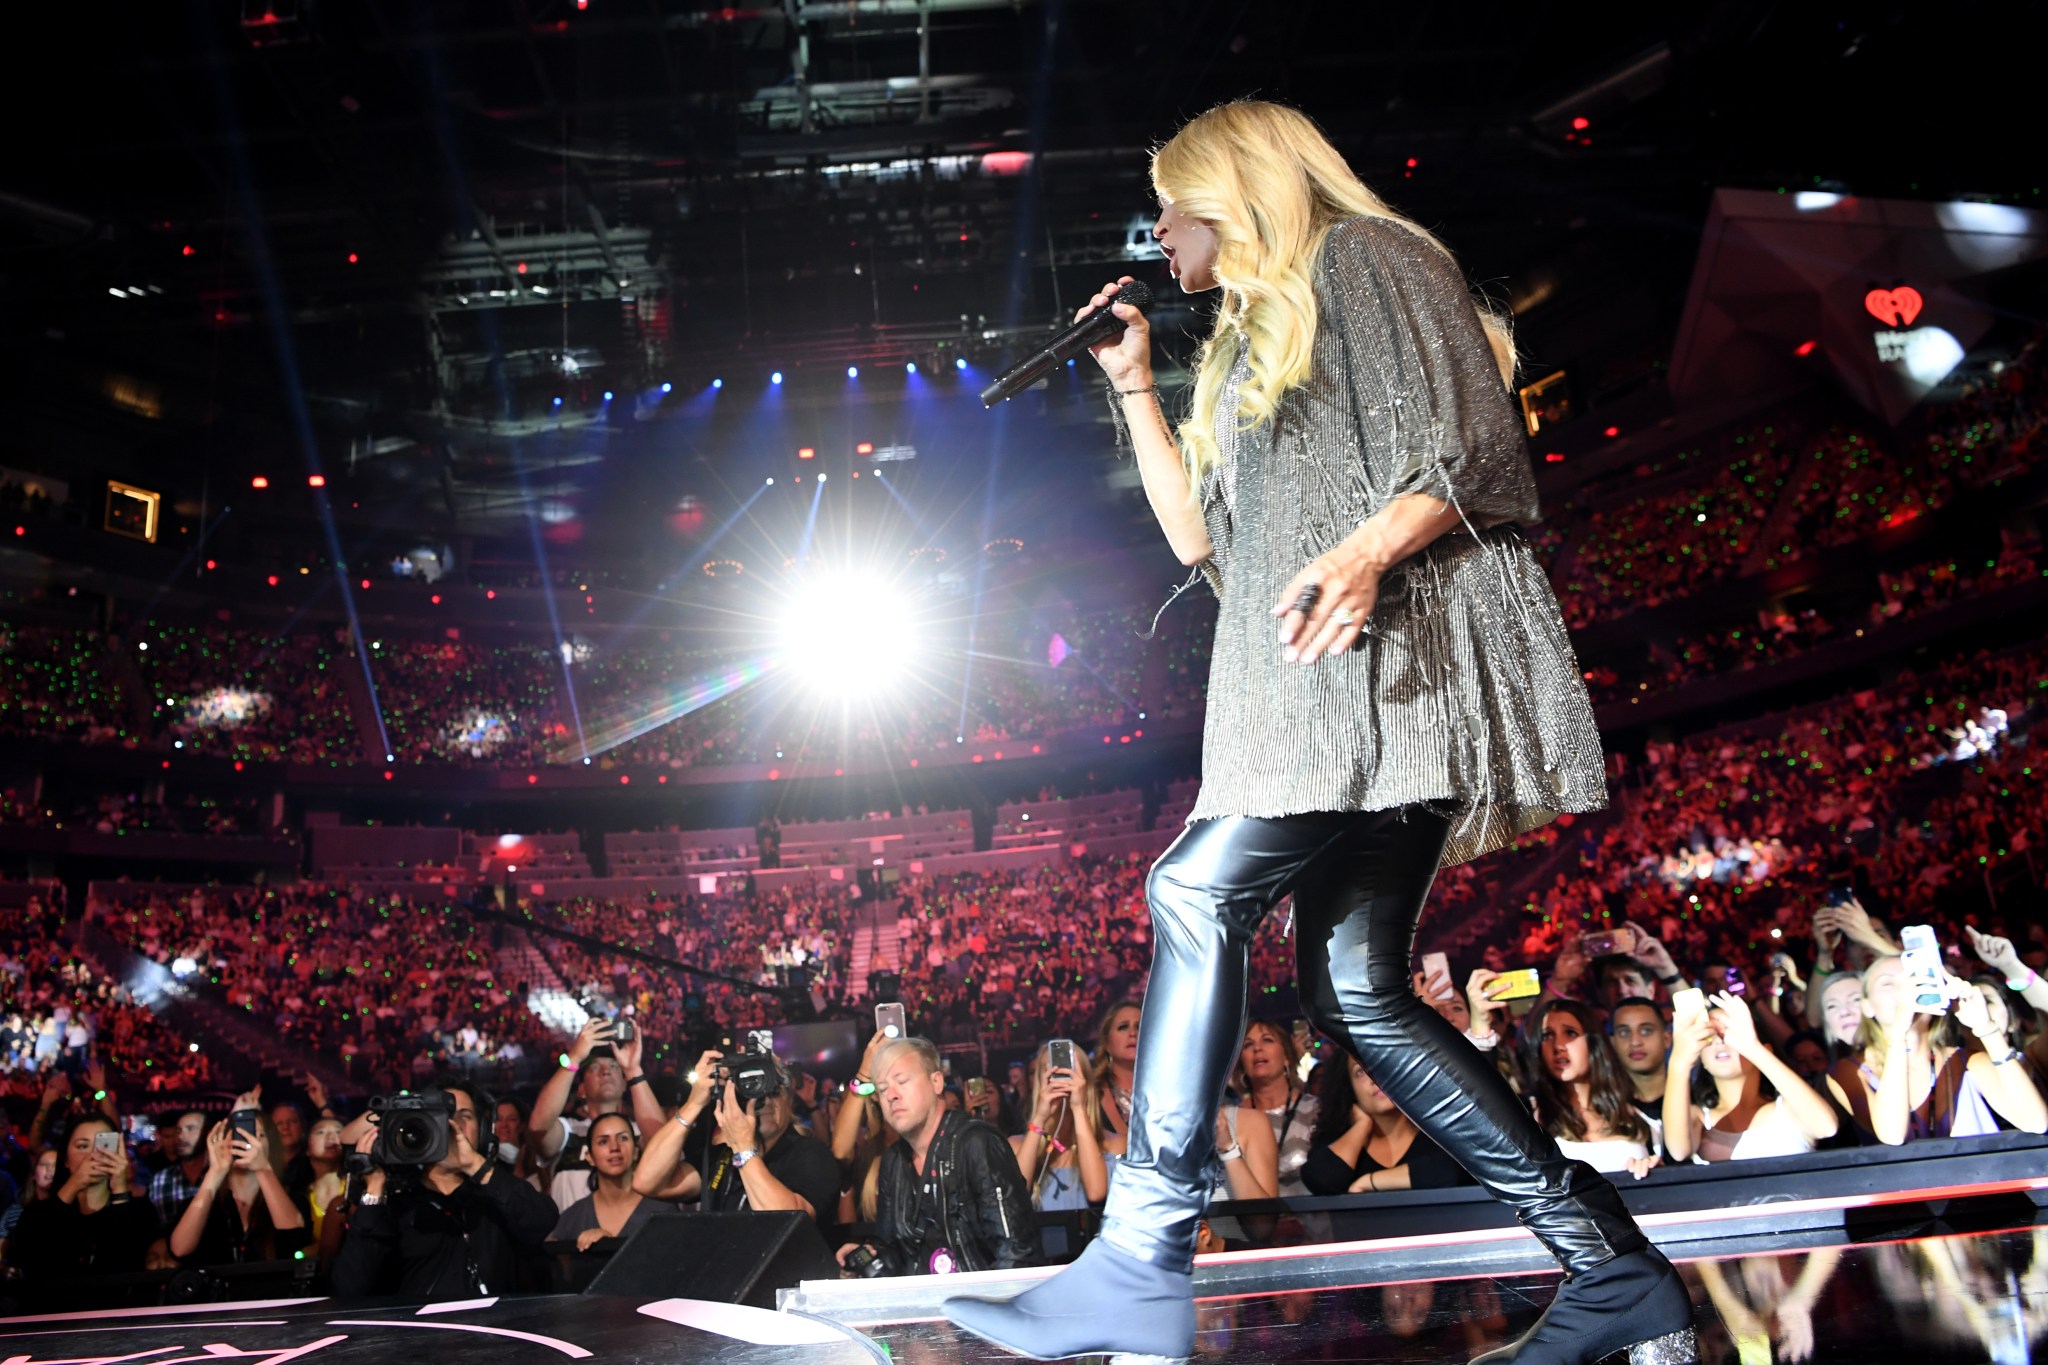 Carrie Underwood performs onstage during the iHeartRadio Music Festival at T-Mobile Arena on Sept. 22 in Las Vegas, Nev.